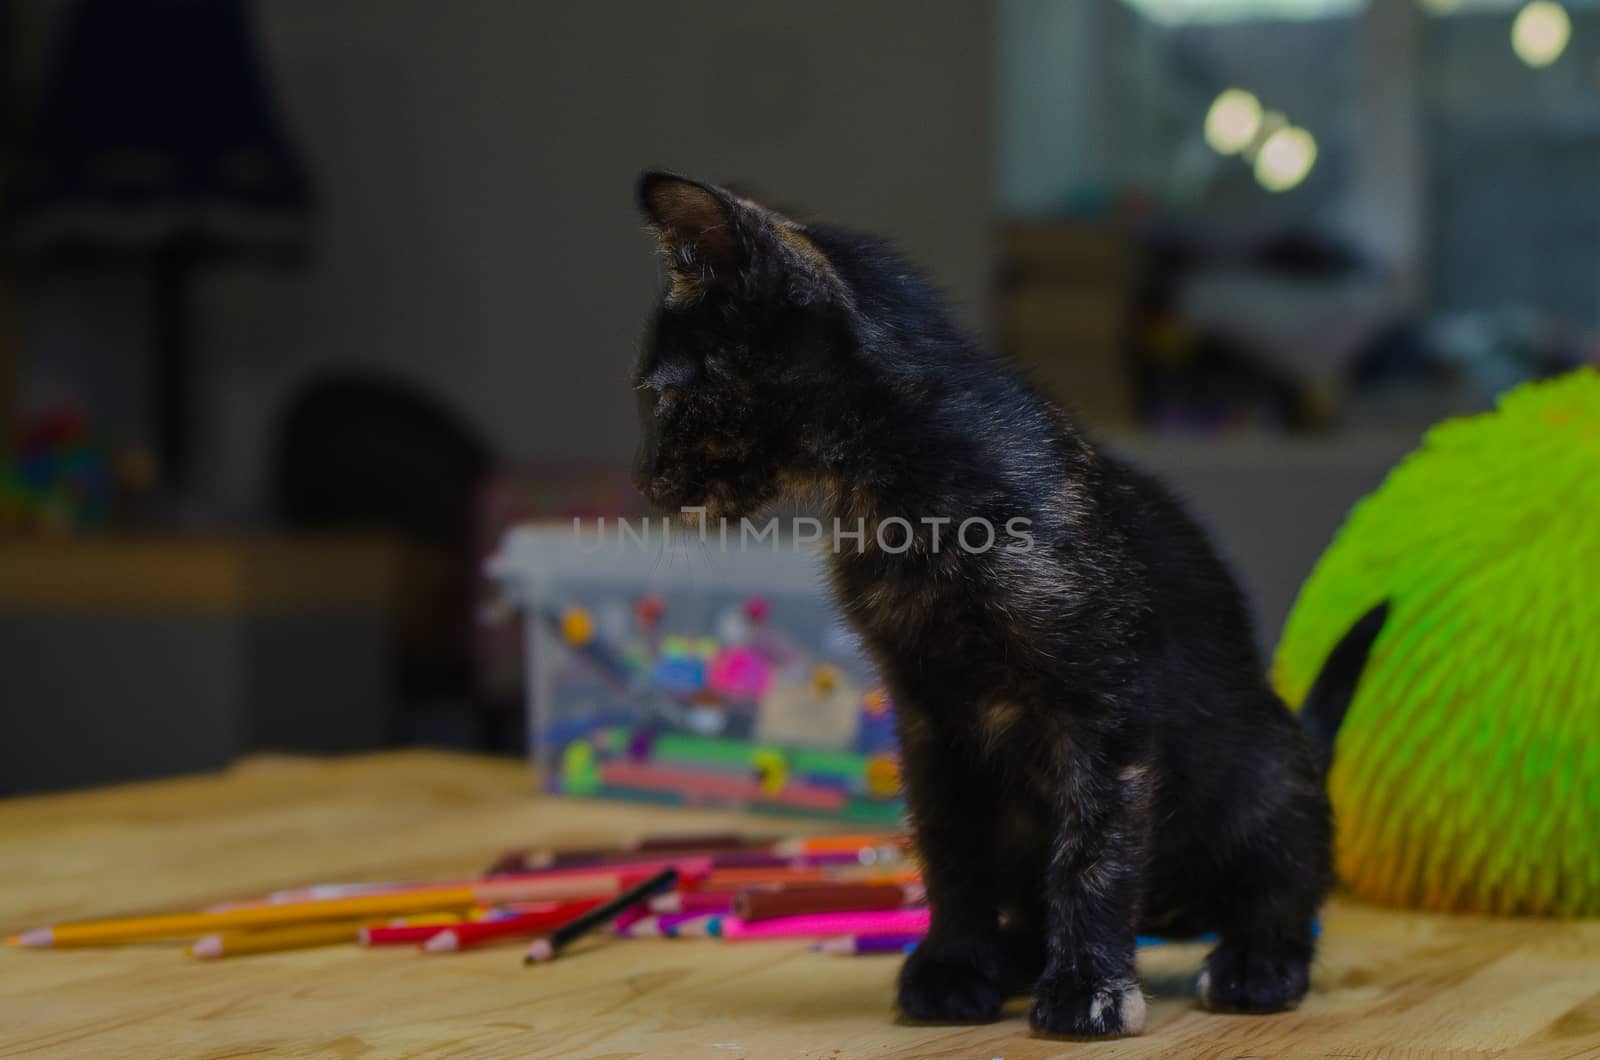 black kitty sit near the colored pencils by chernobrovin